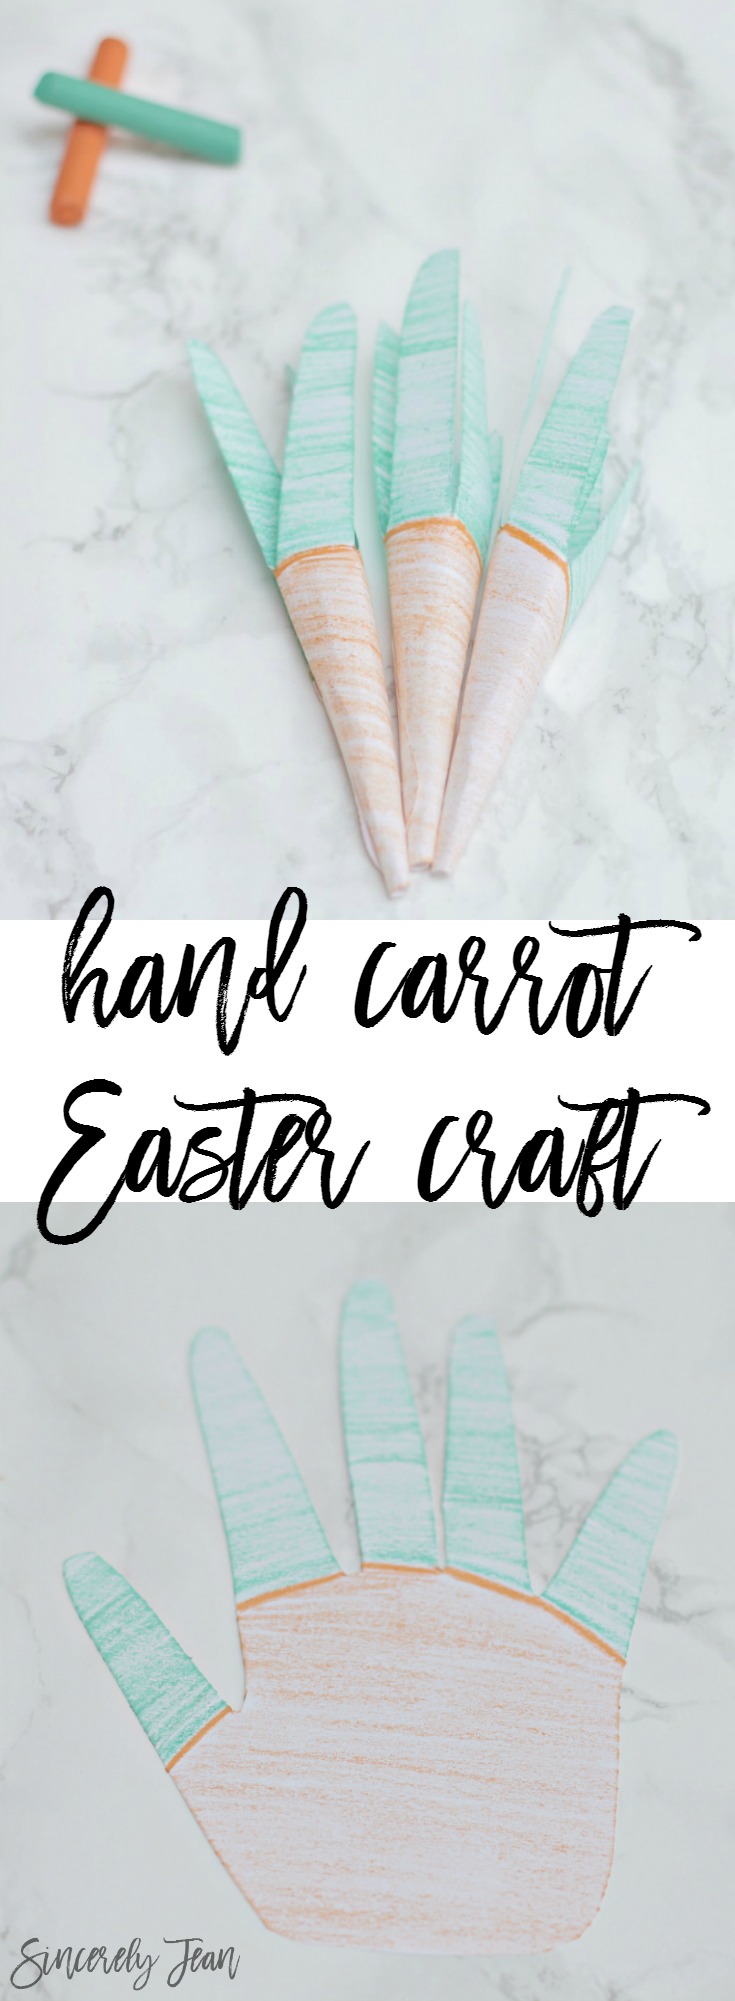 Kids Easter Craft - Hand Carrot - Simple Easter Craft - Kids Craft - Carrot Craft | www.SincerelyJean.com